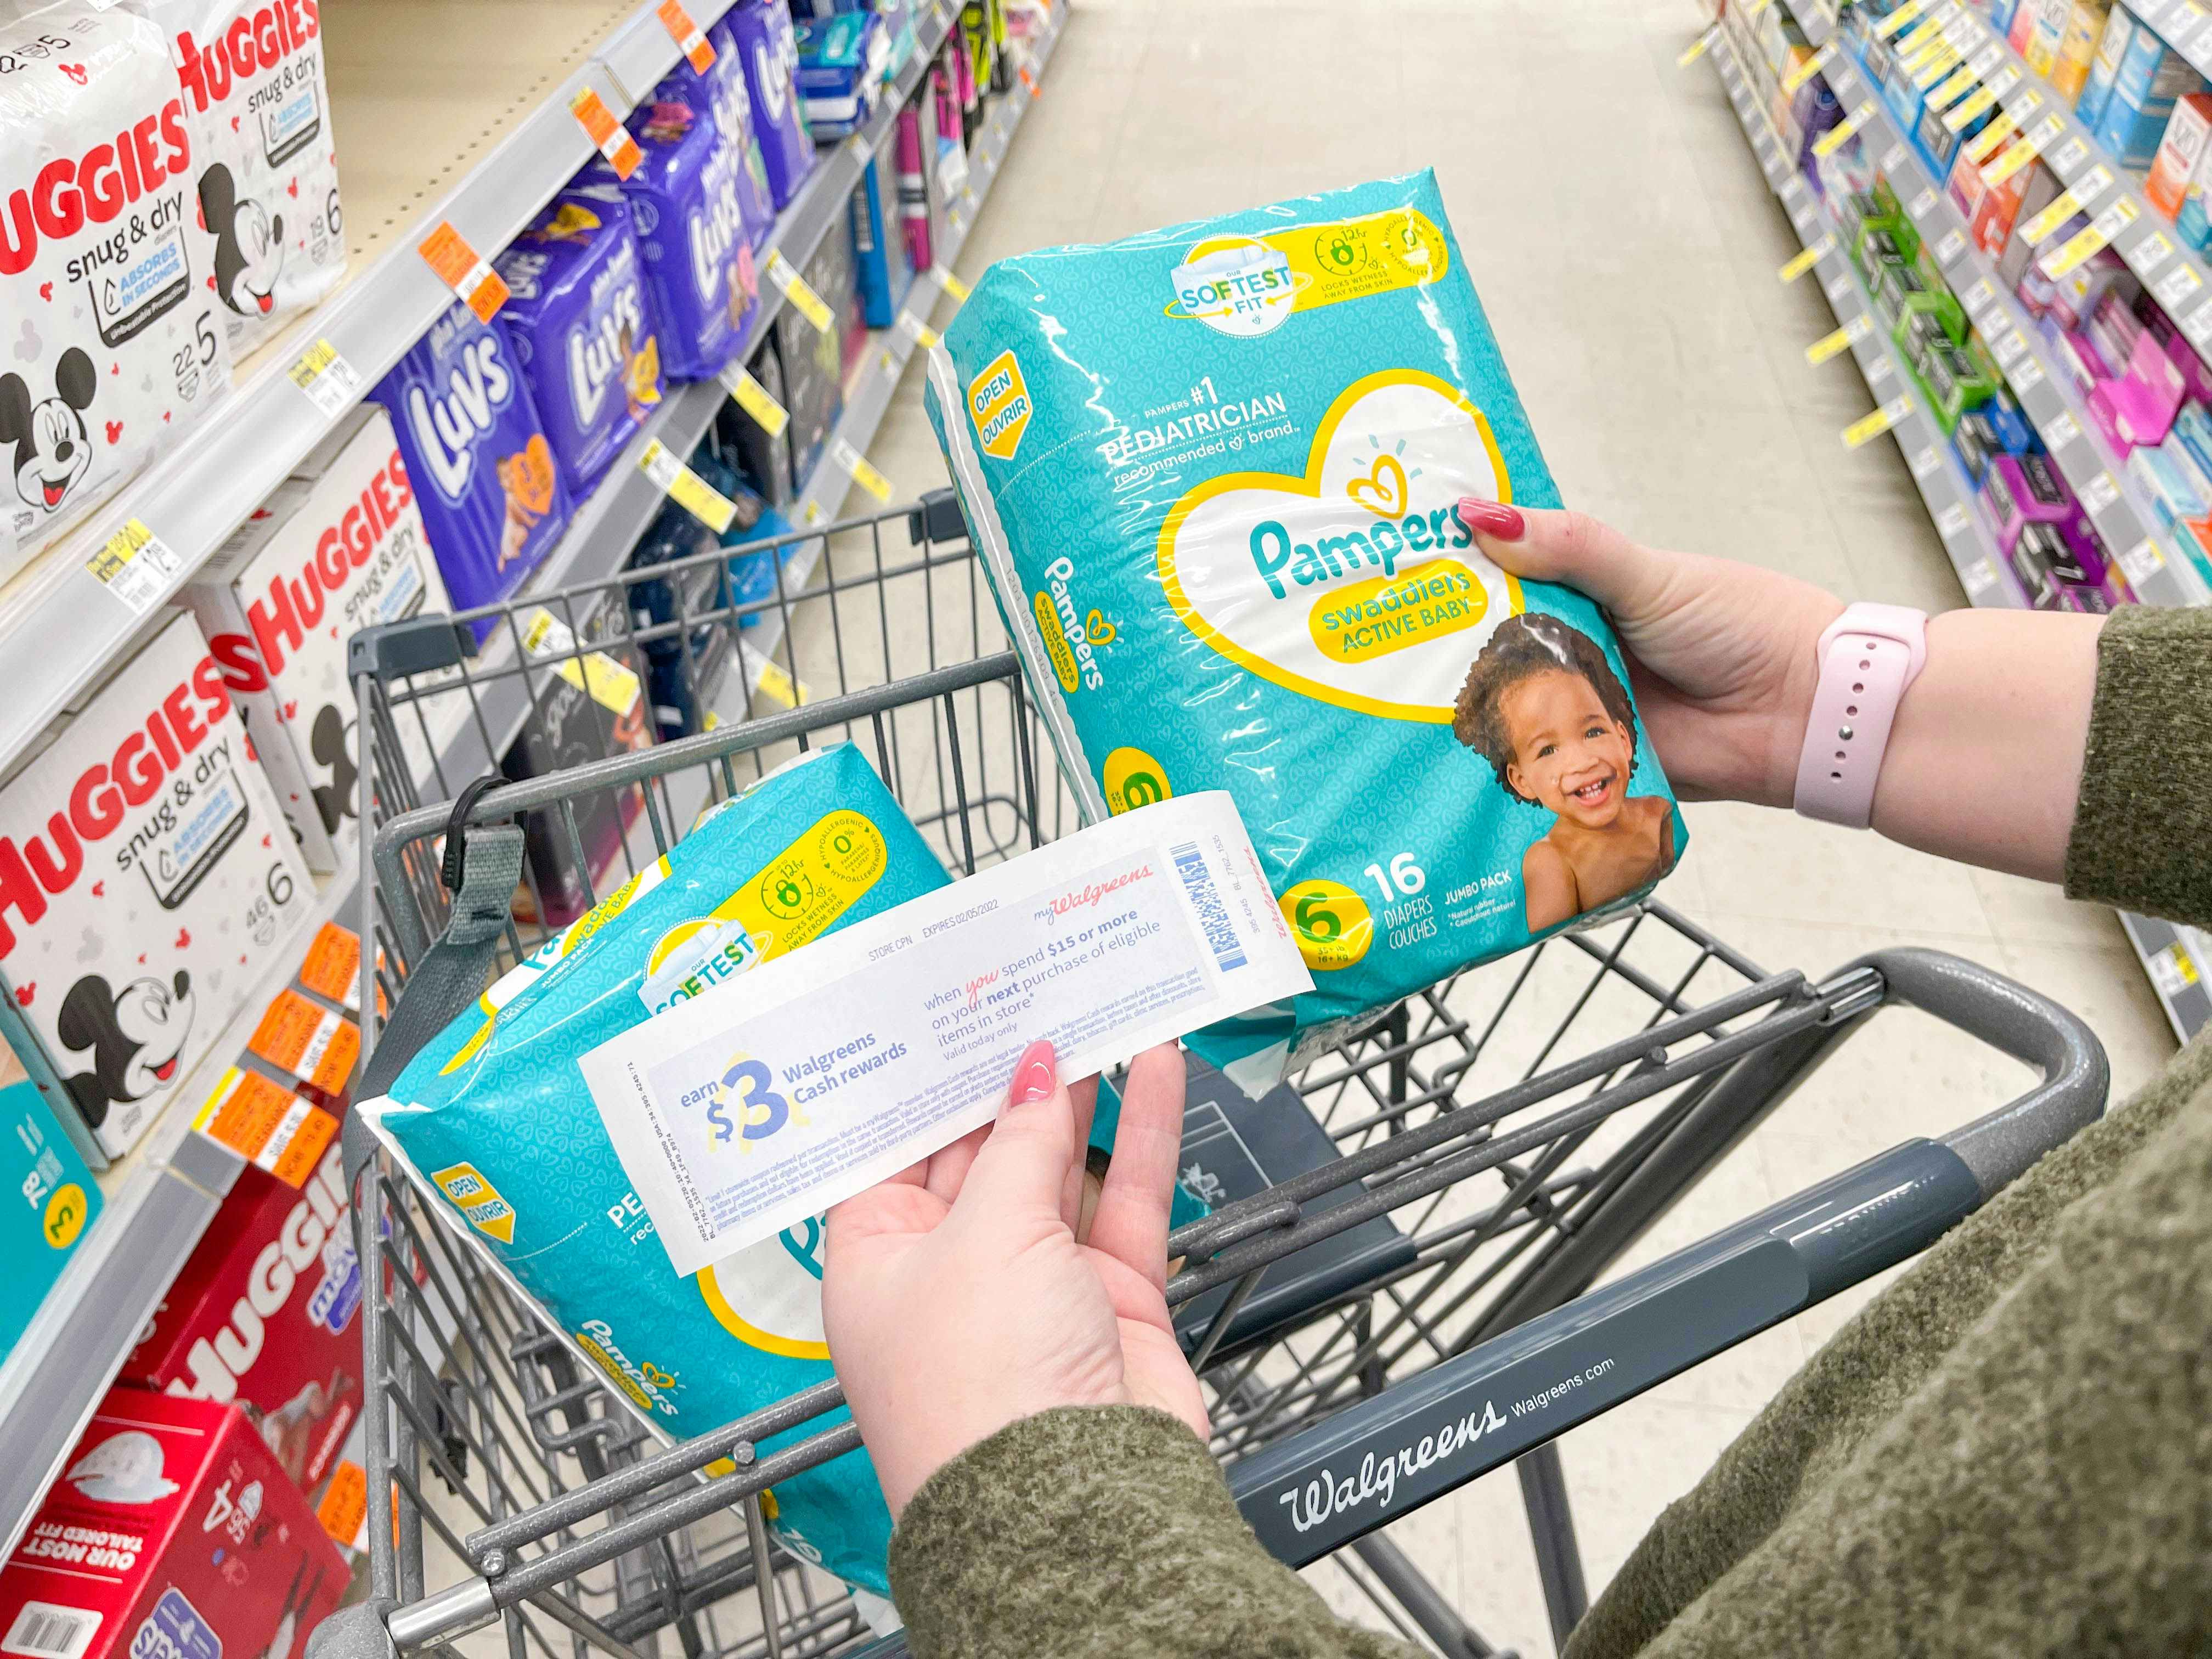 holding pampers diapers while holding walgreens cash rewards